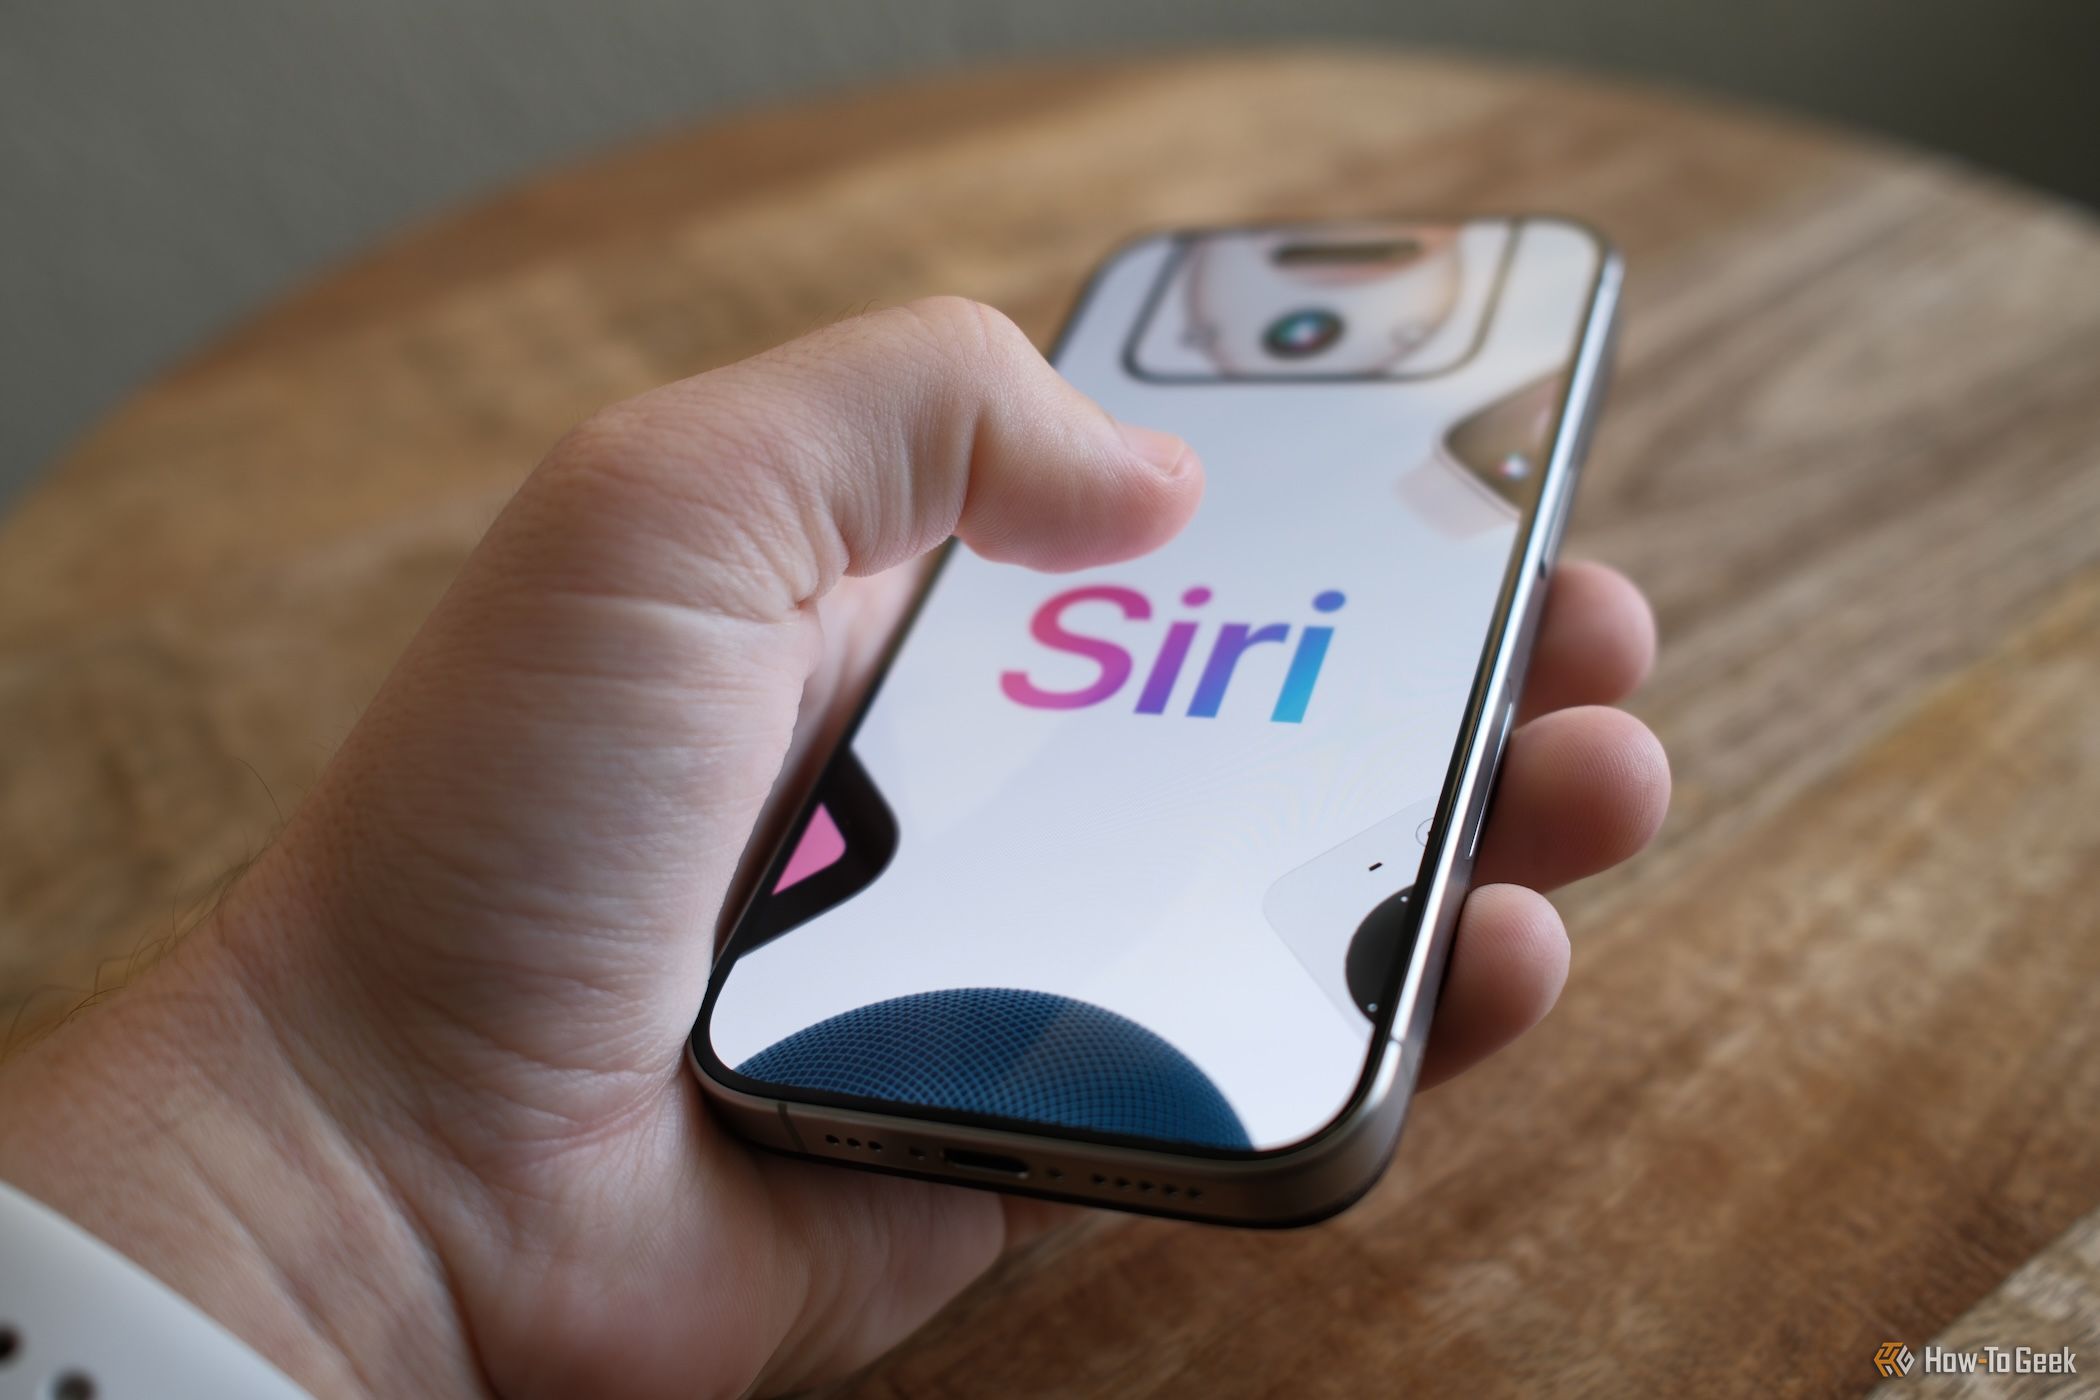 A person holding an iPhone with the word Siri on screen.